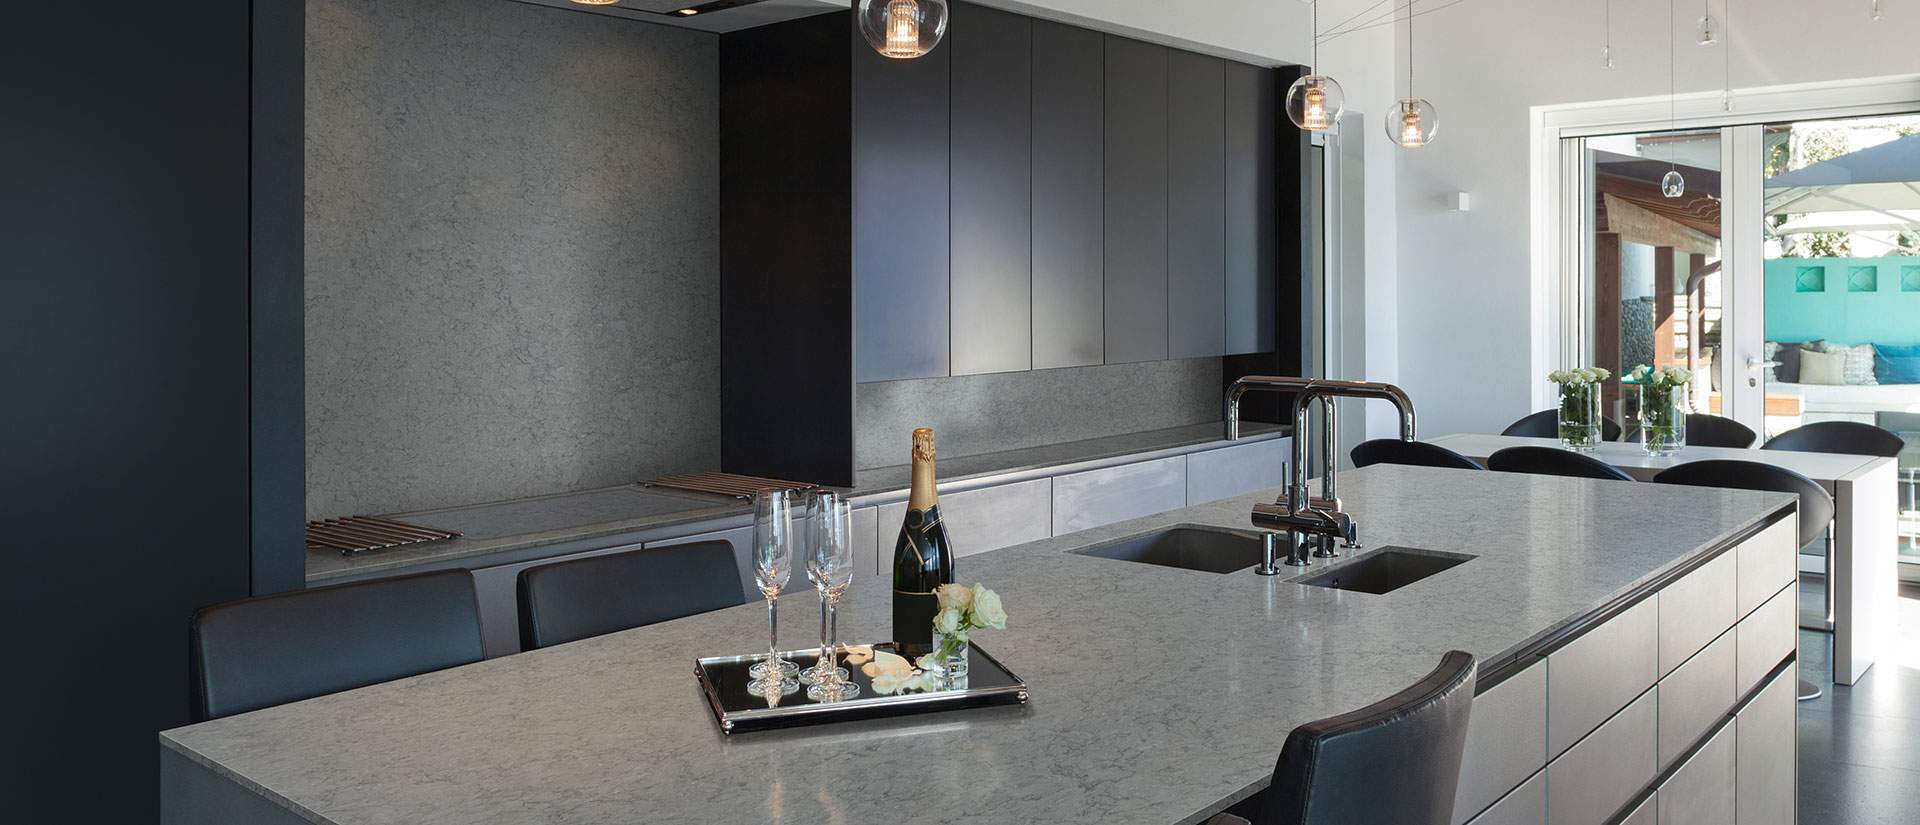 Galant Gray Quartz countertop in a spacious and airy kitchen